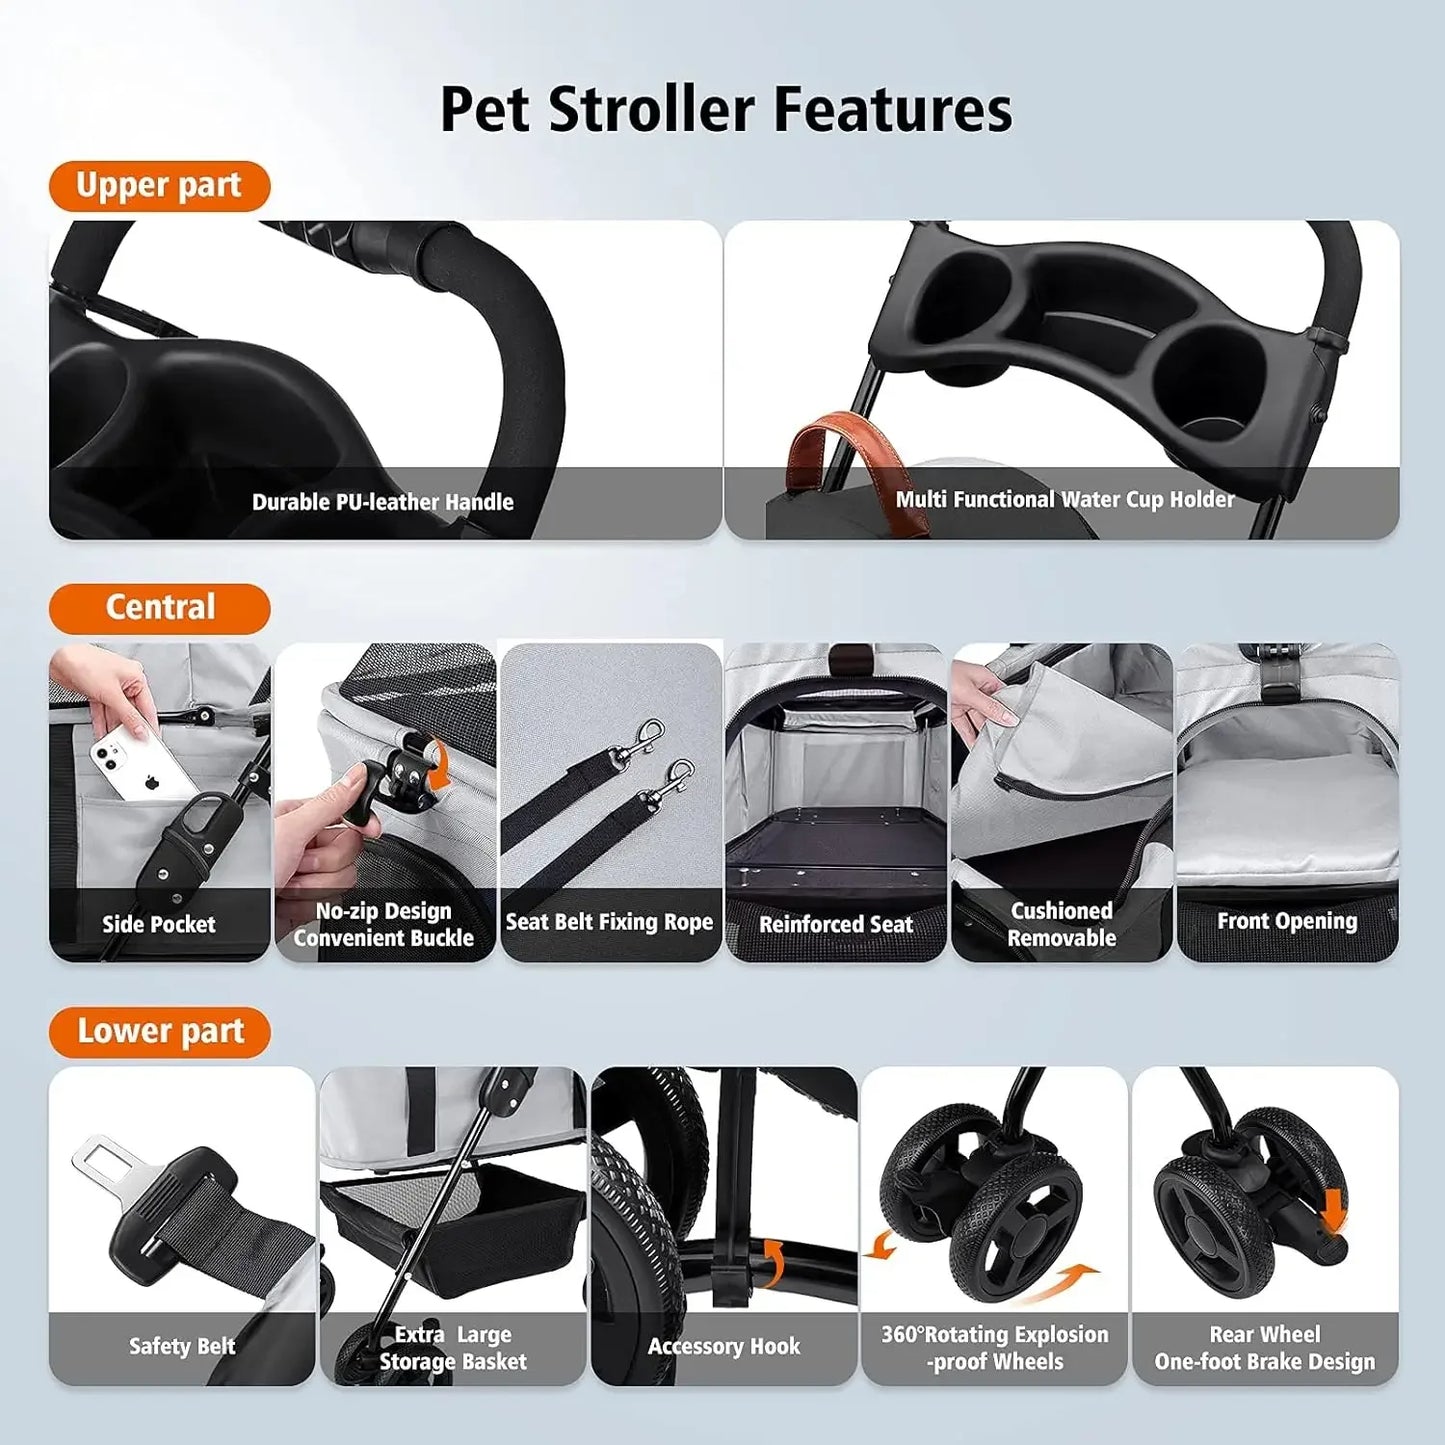 Dog Cat Pet Gear 3-in-1 Foldable Pet Stroller Detachable Carrier, Car Seat and Stroller with Push Button Entry for Small Pets